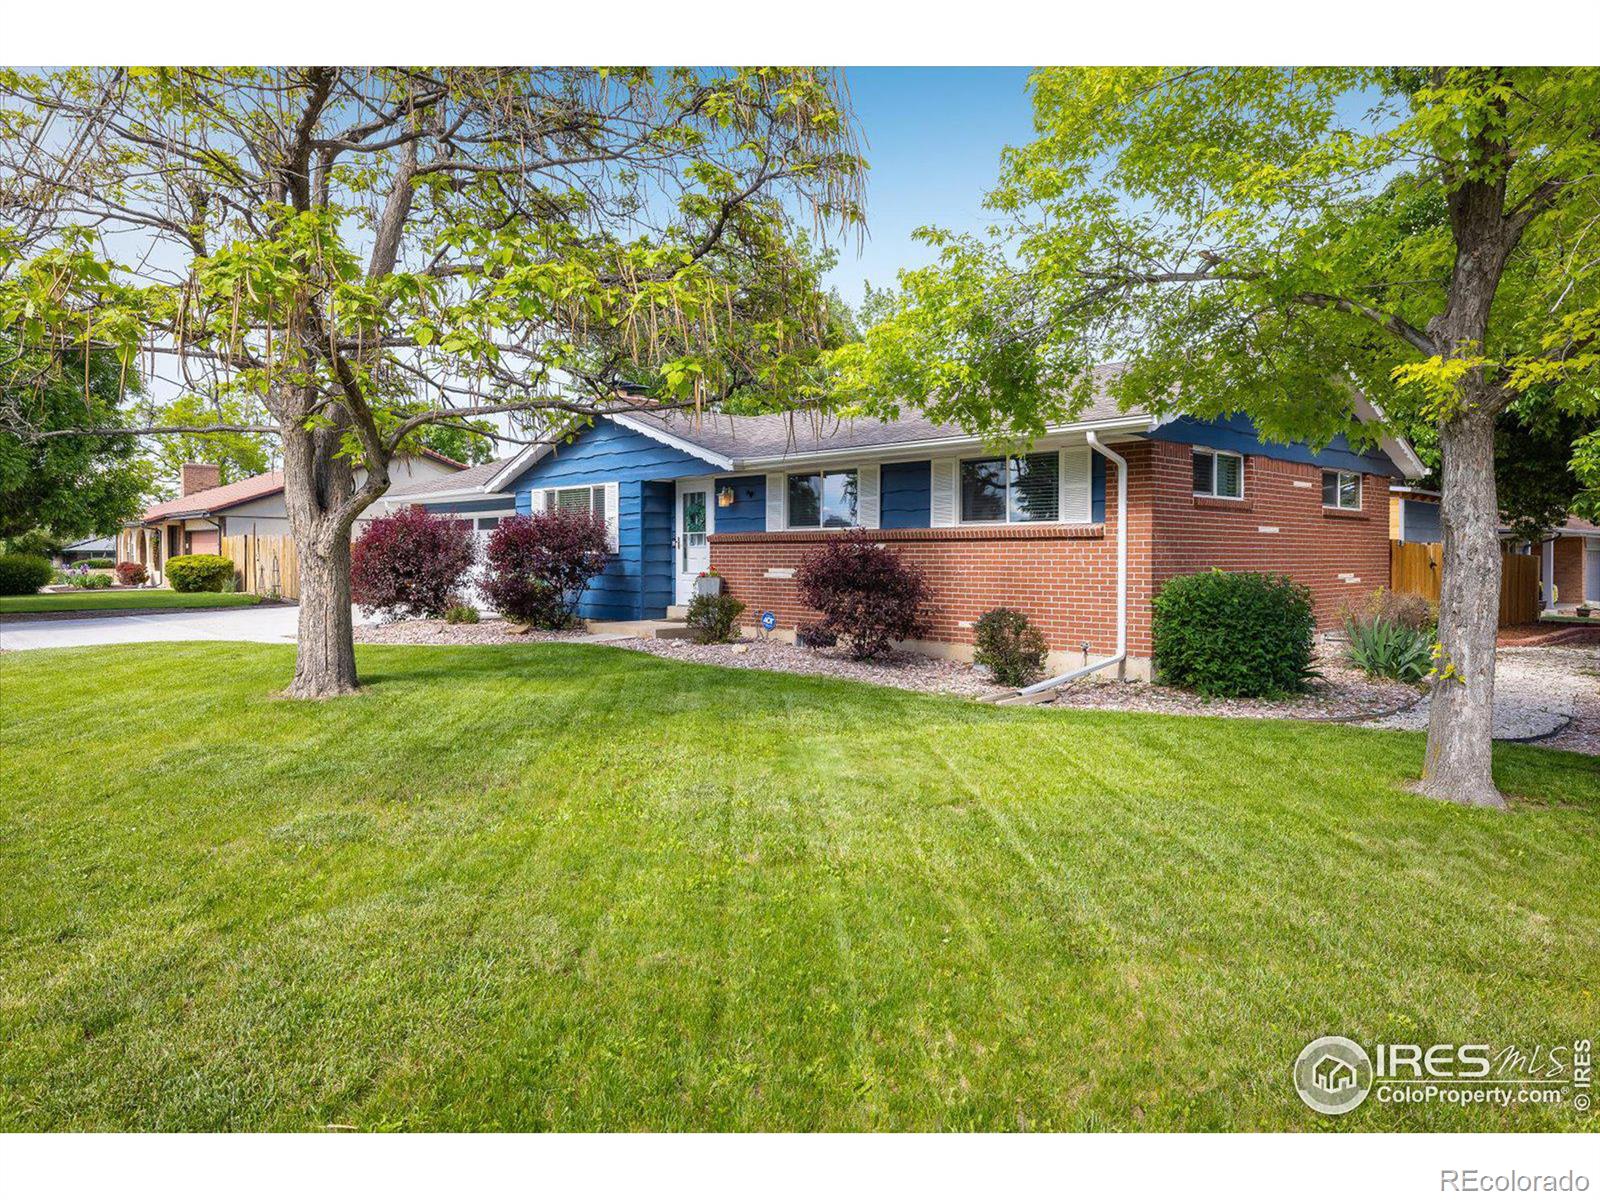 7054  carr street, Arvada sold home. Closed on 2024-04-30 for $655,000.